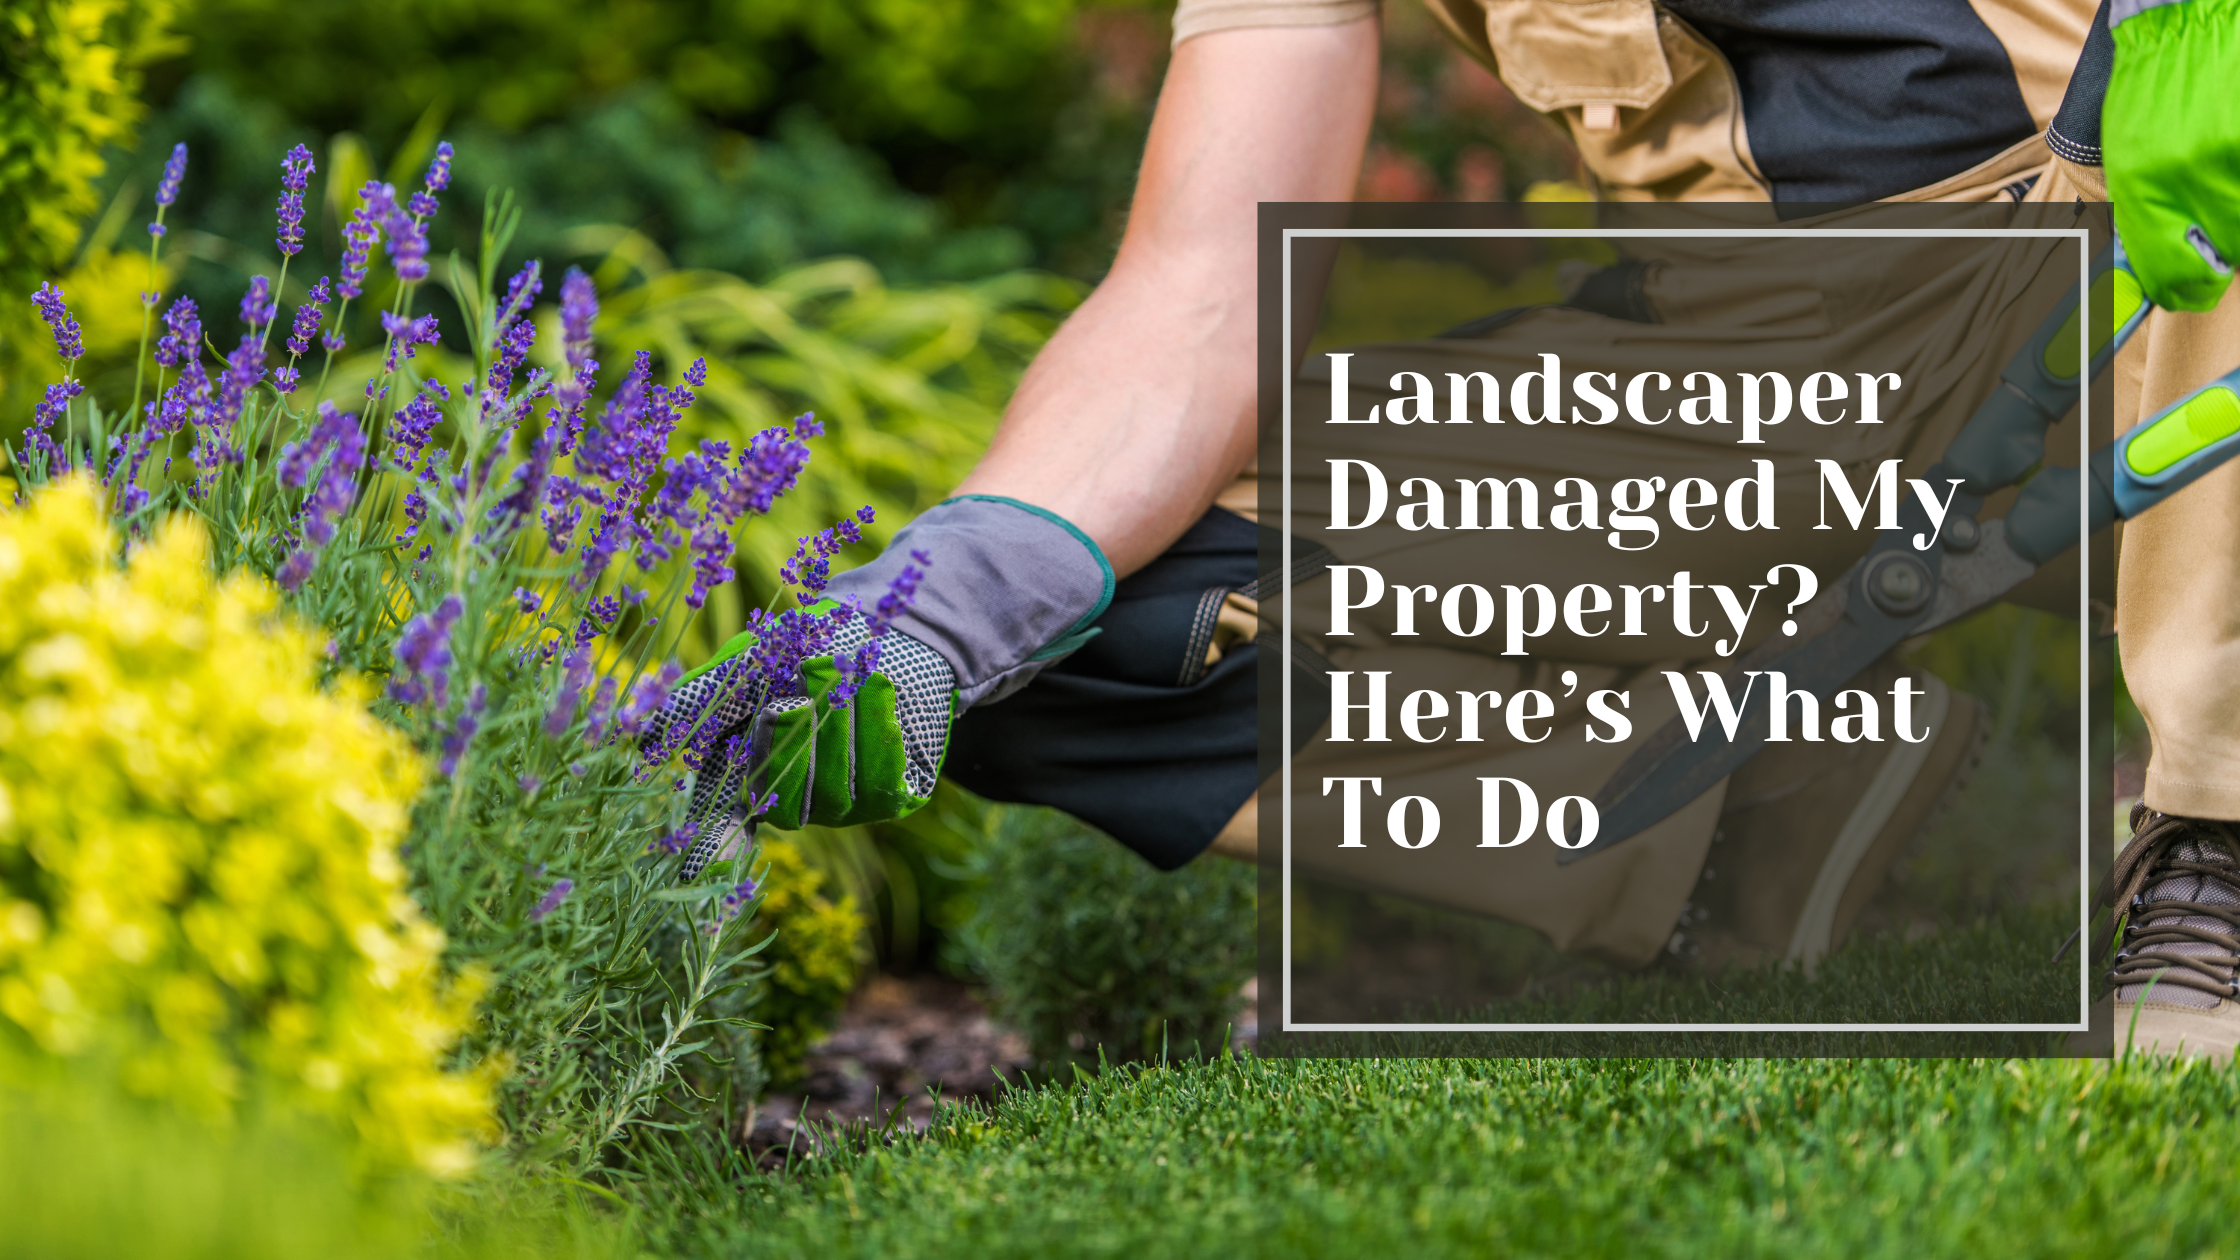 Landscaper Damaged My Property? Here’s What To Do